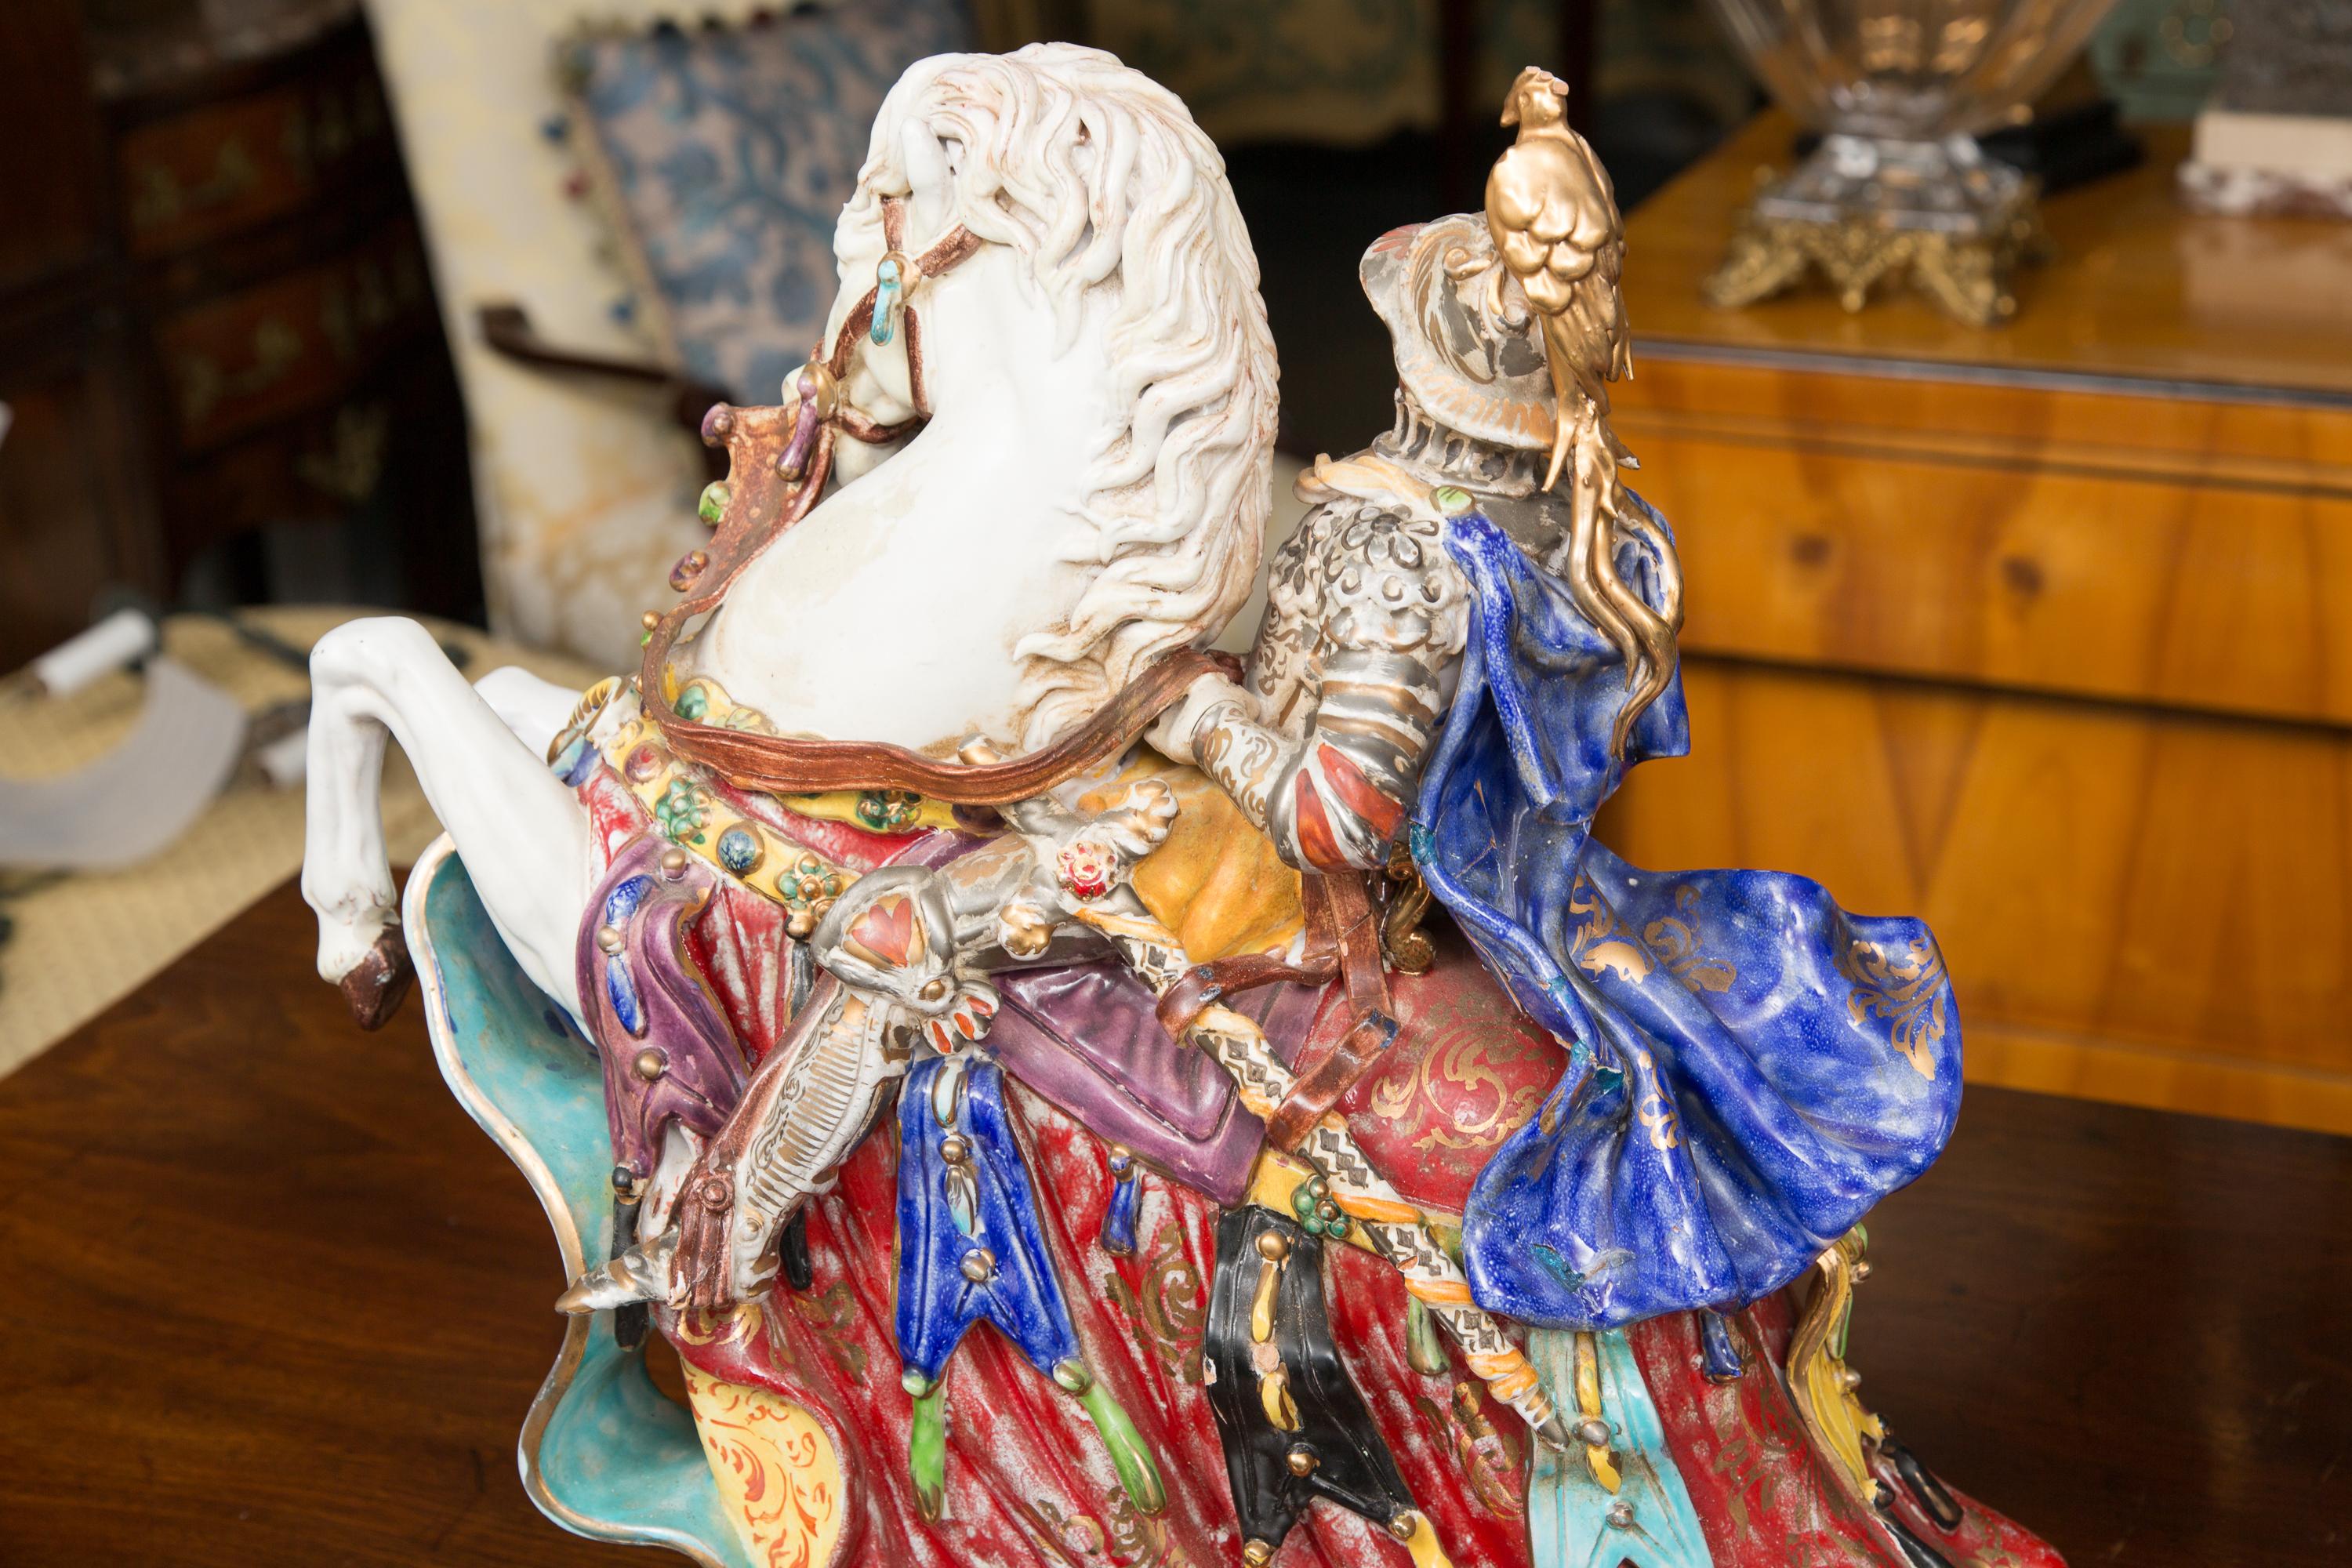 Other Pair of Colorful Italian Glazed Porcelain Figures